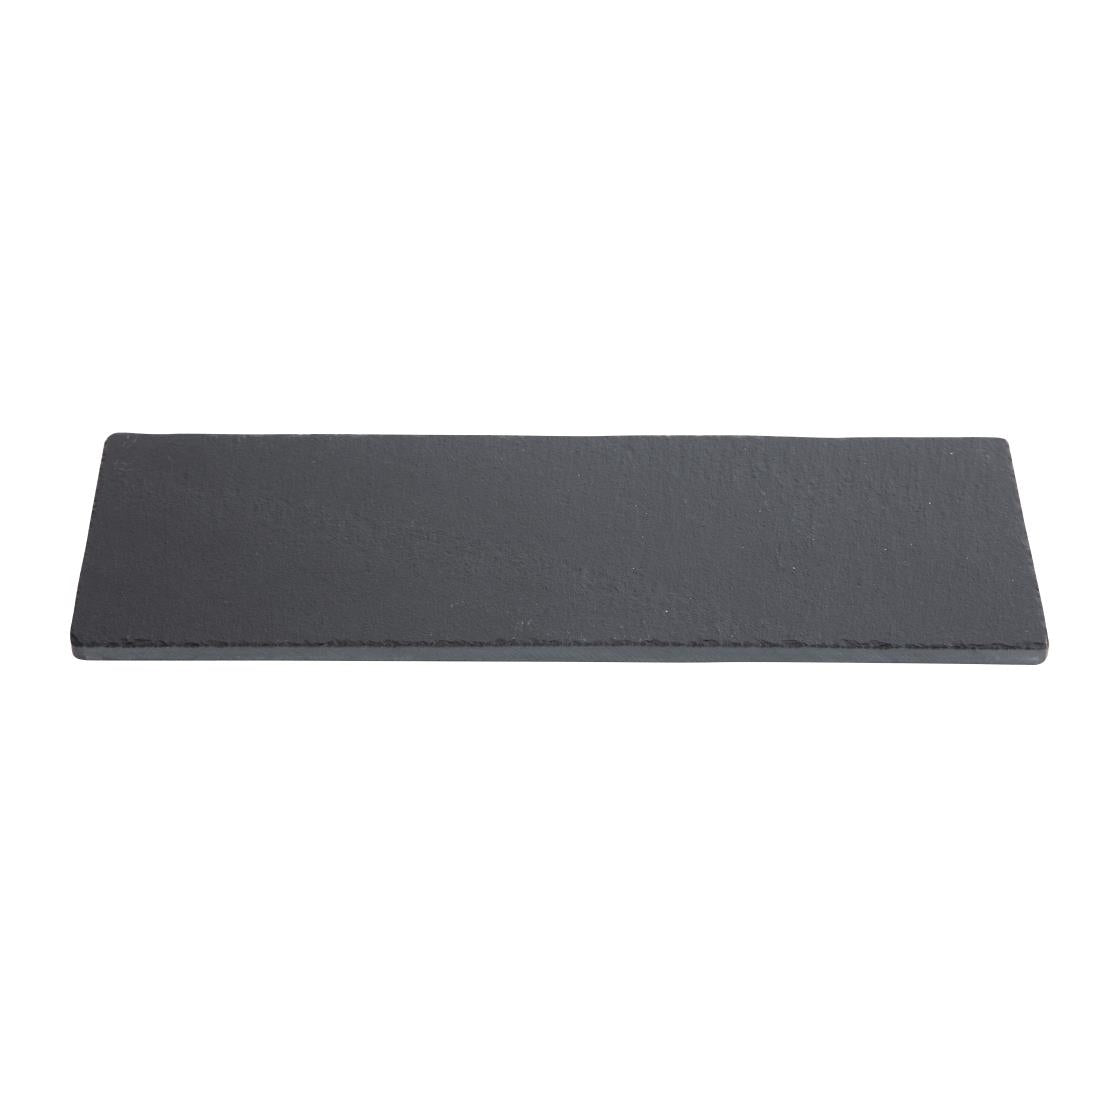 Olympia Smooth Edged Slate Platters 280 x 100mm (Pack of 2)